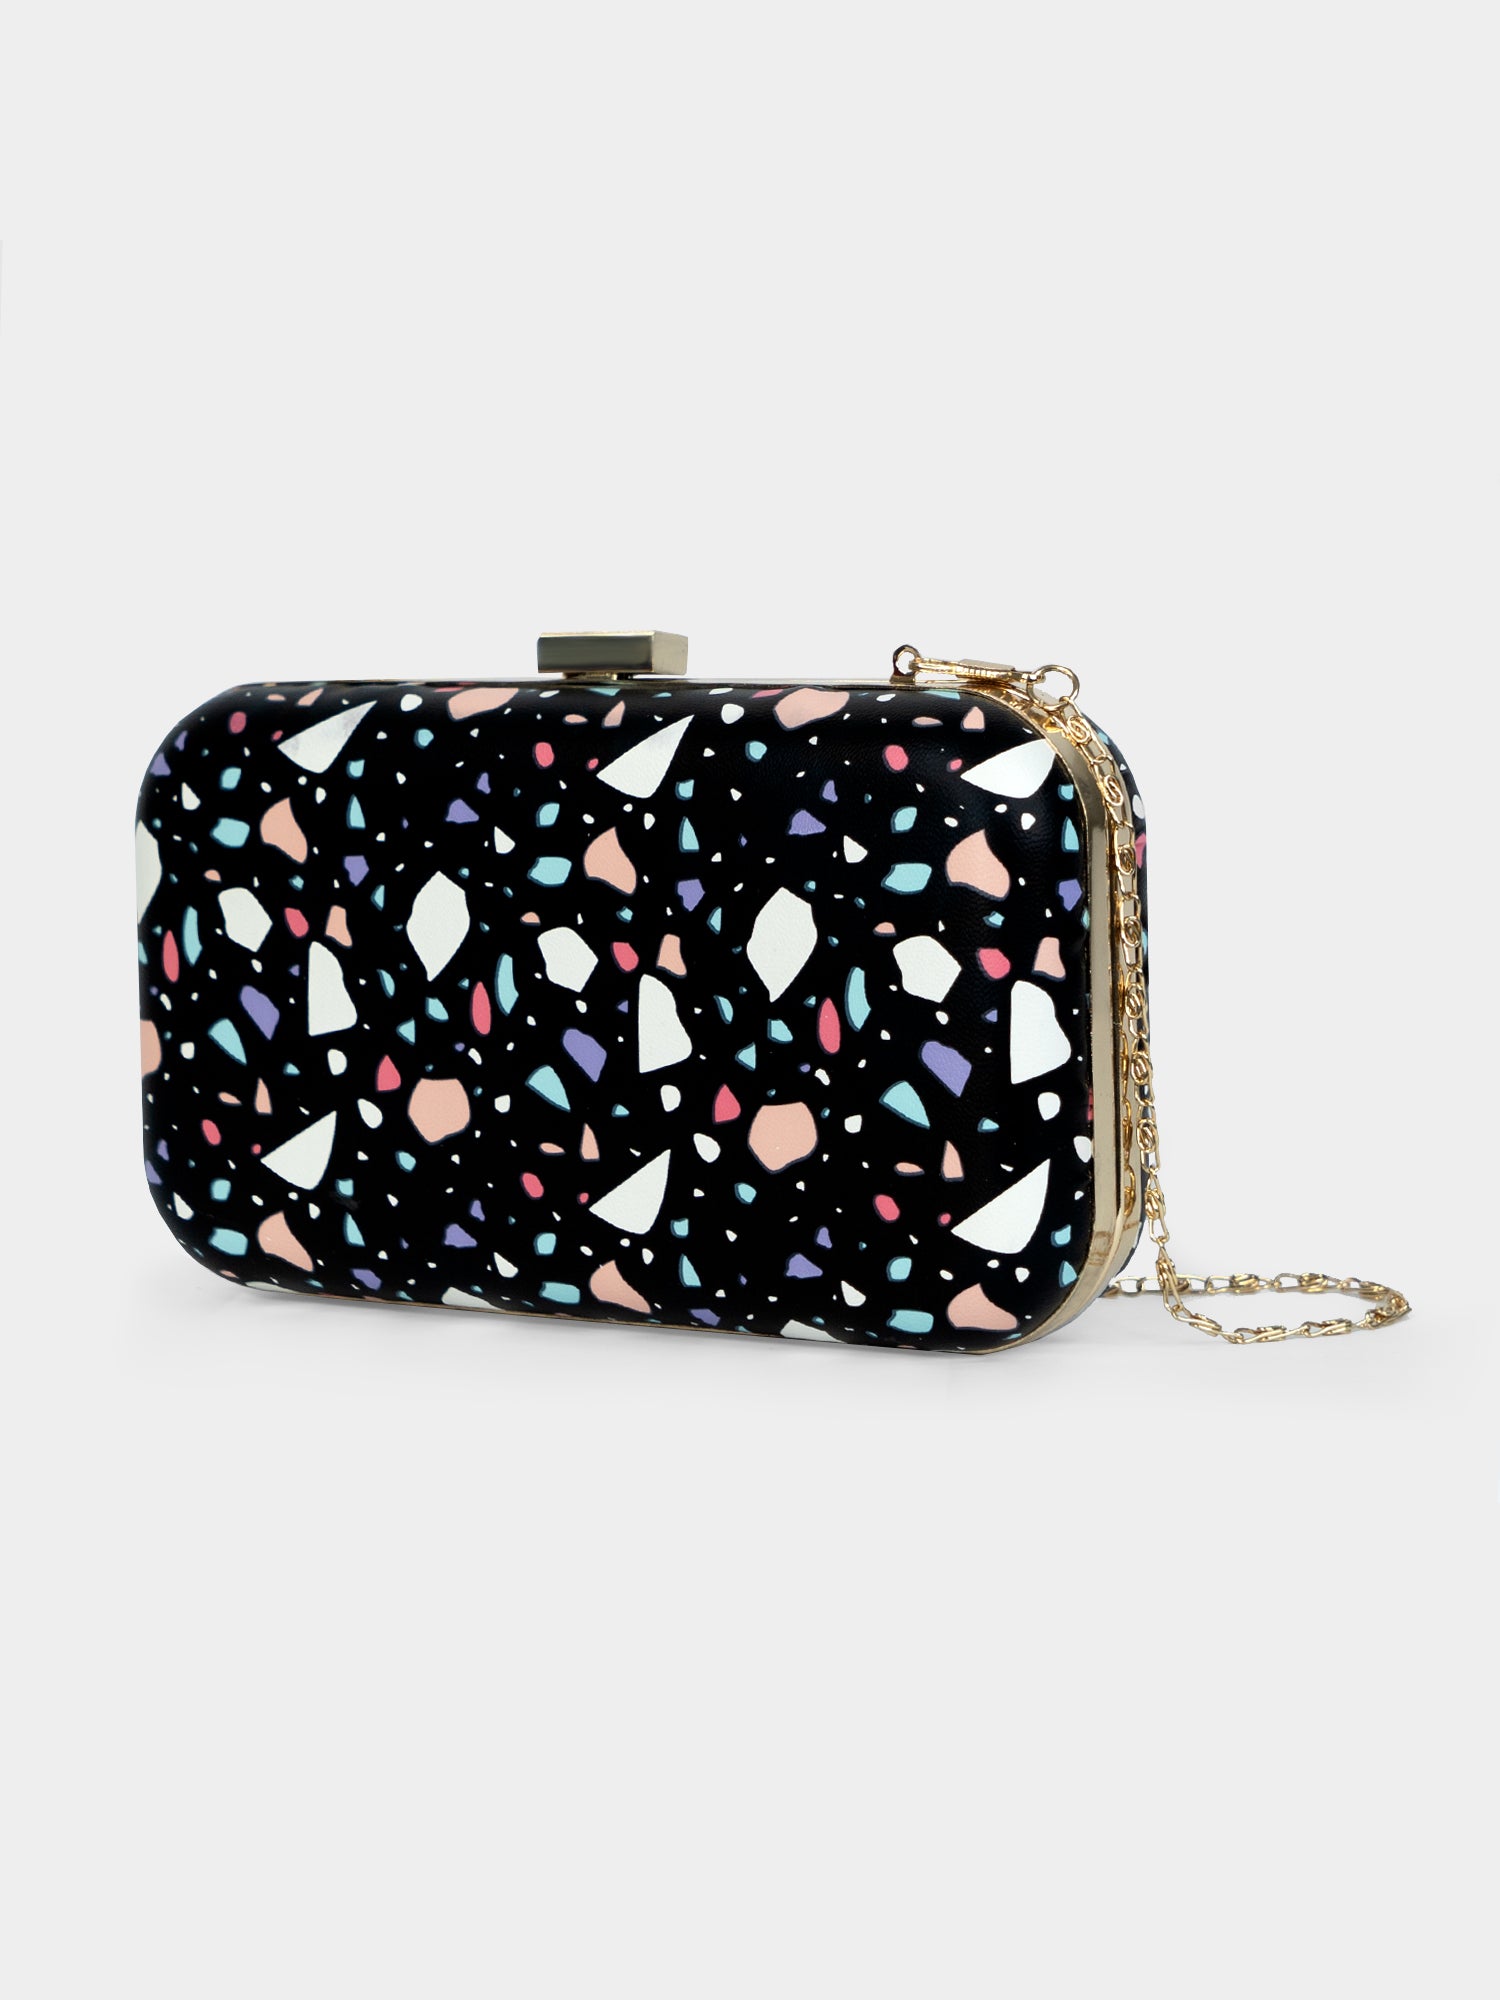 nesAccessoriers Black Sequin Clutch Purse Handbag - Perfect for Weddings,  Cocktail Parties, and Nights Out on the Town with Detachable Sling 8X4.5  inch : Amazon.in: Fashion